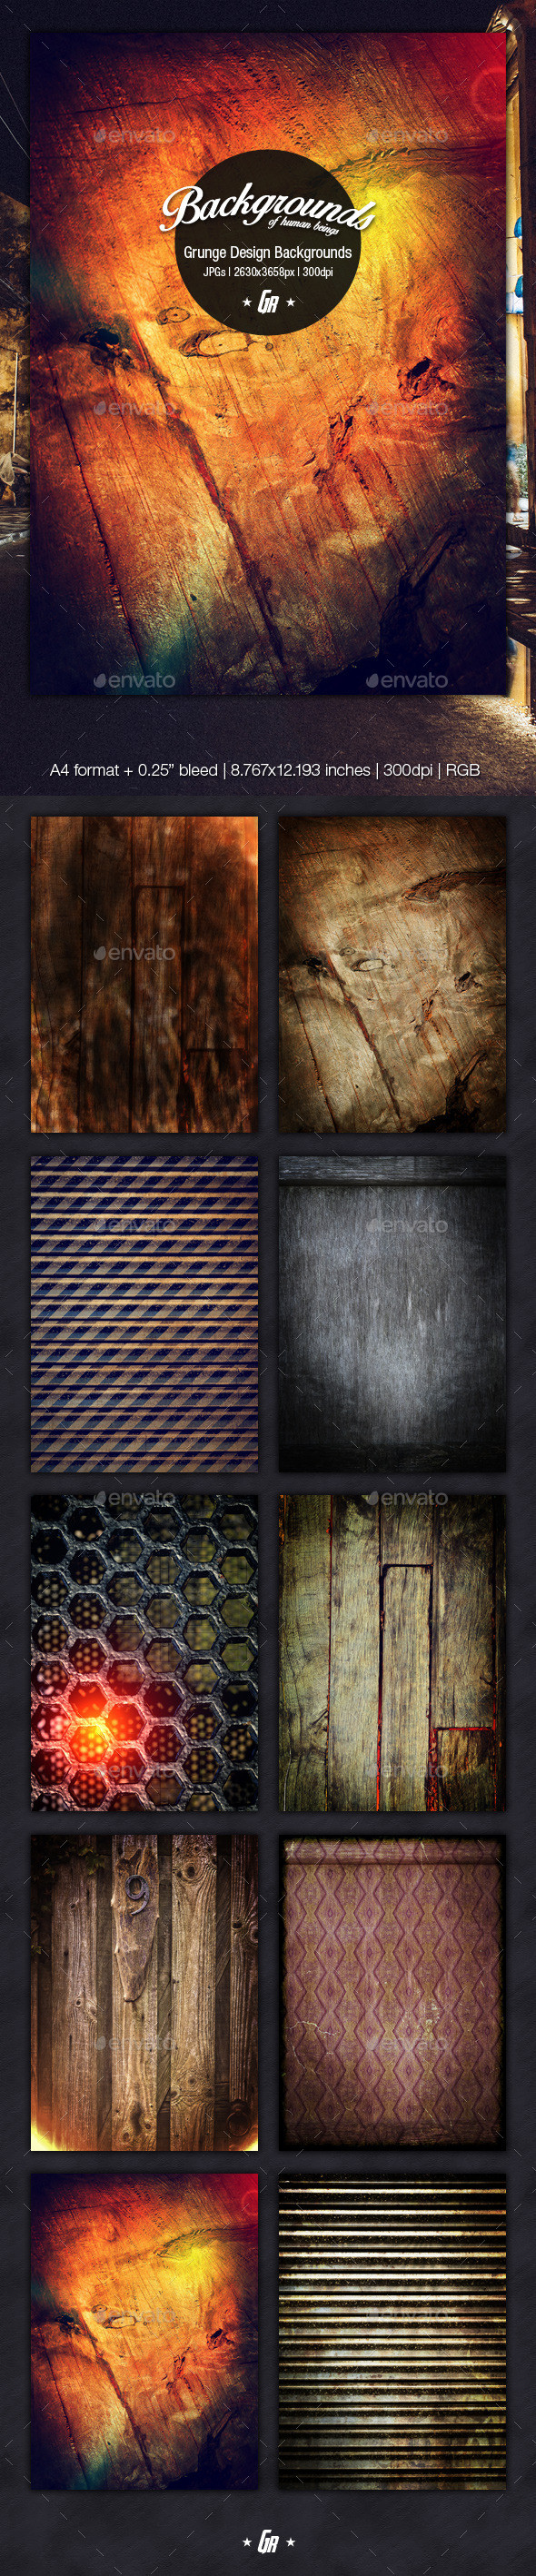 A4 grunge design backgrounds preview